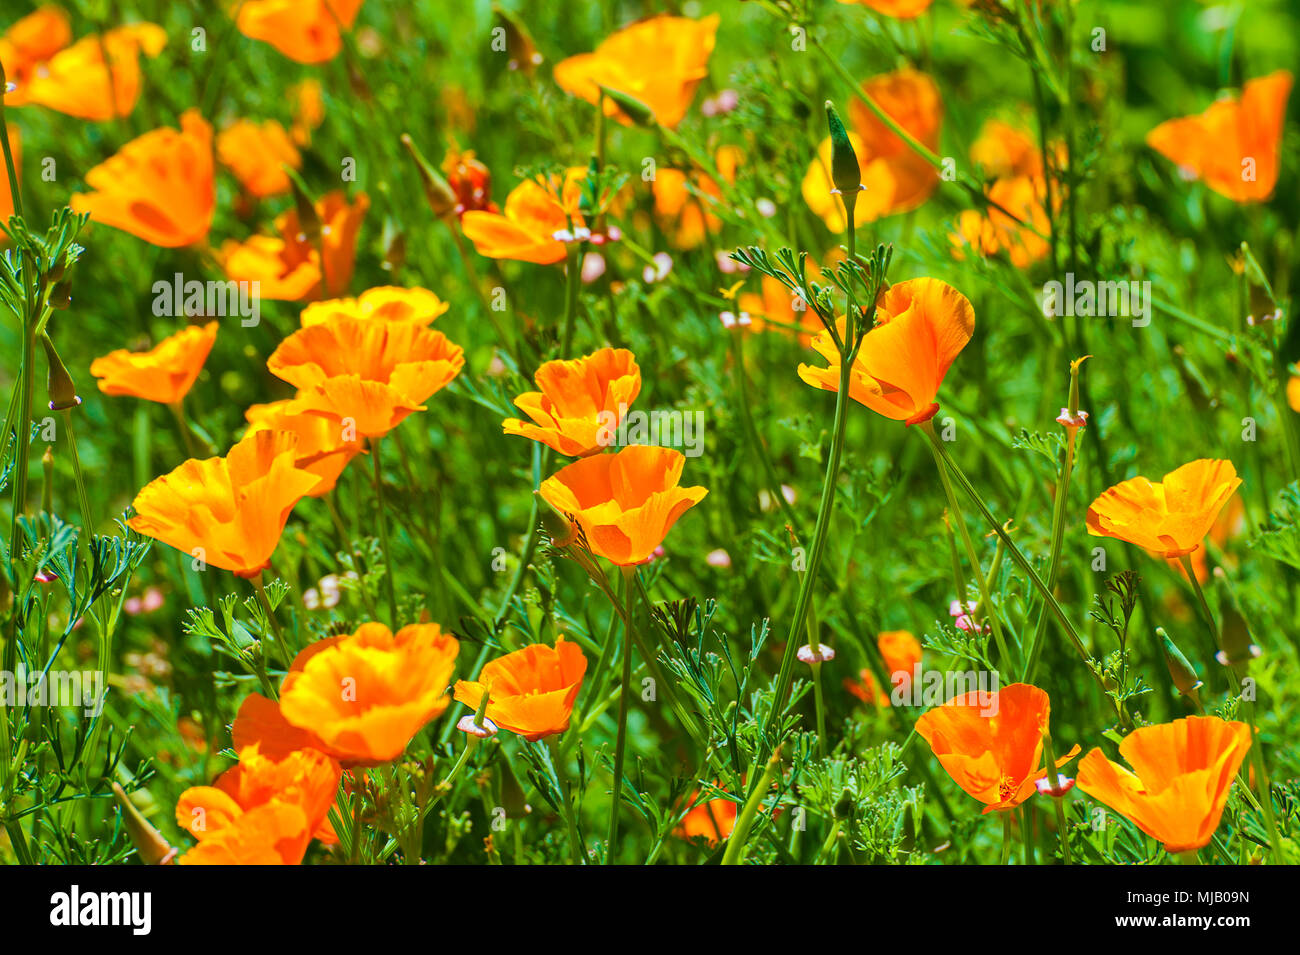 A field of wild orange poppies growing on edge of road. Stock Photo